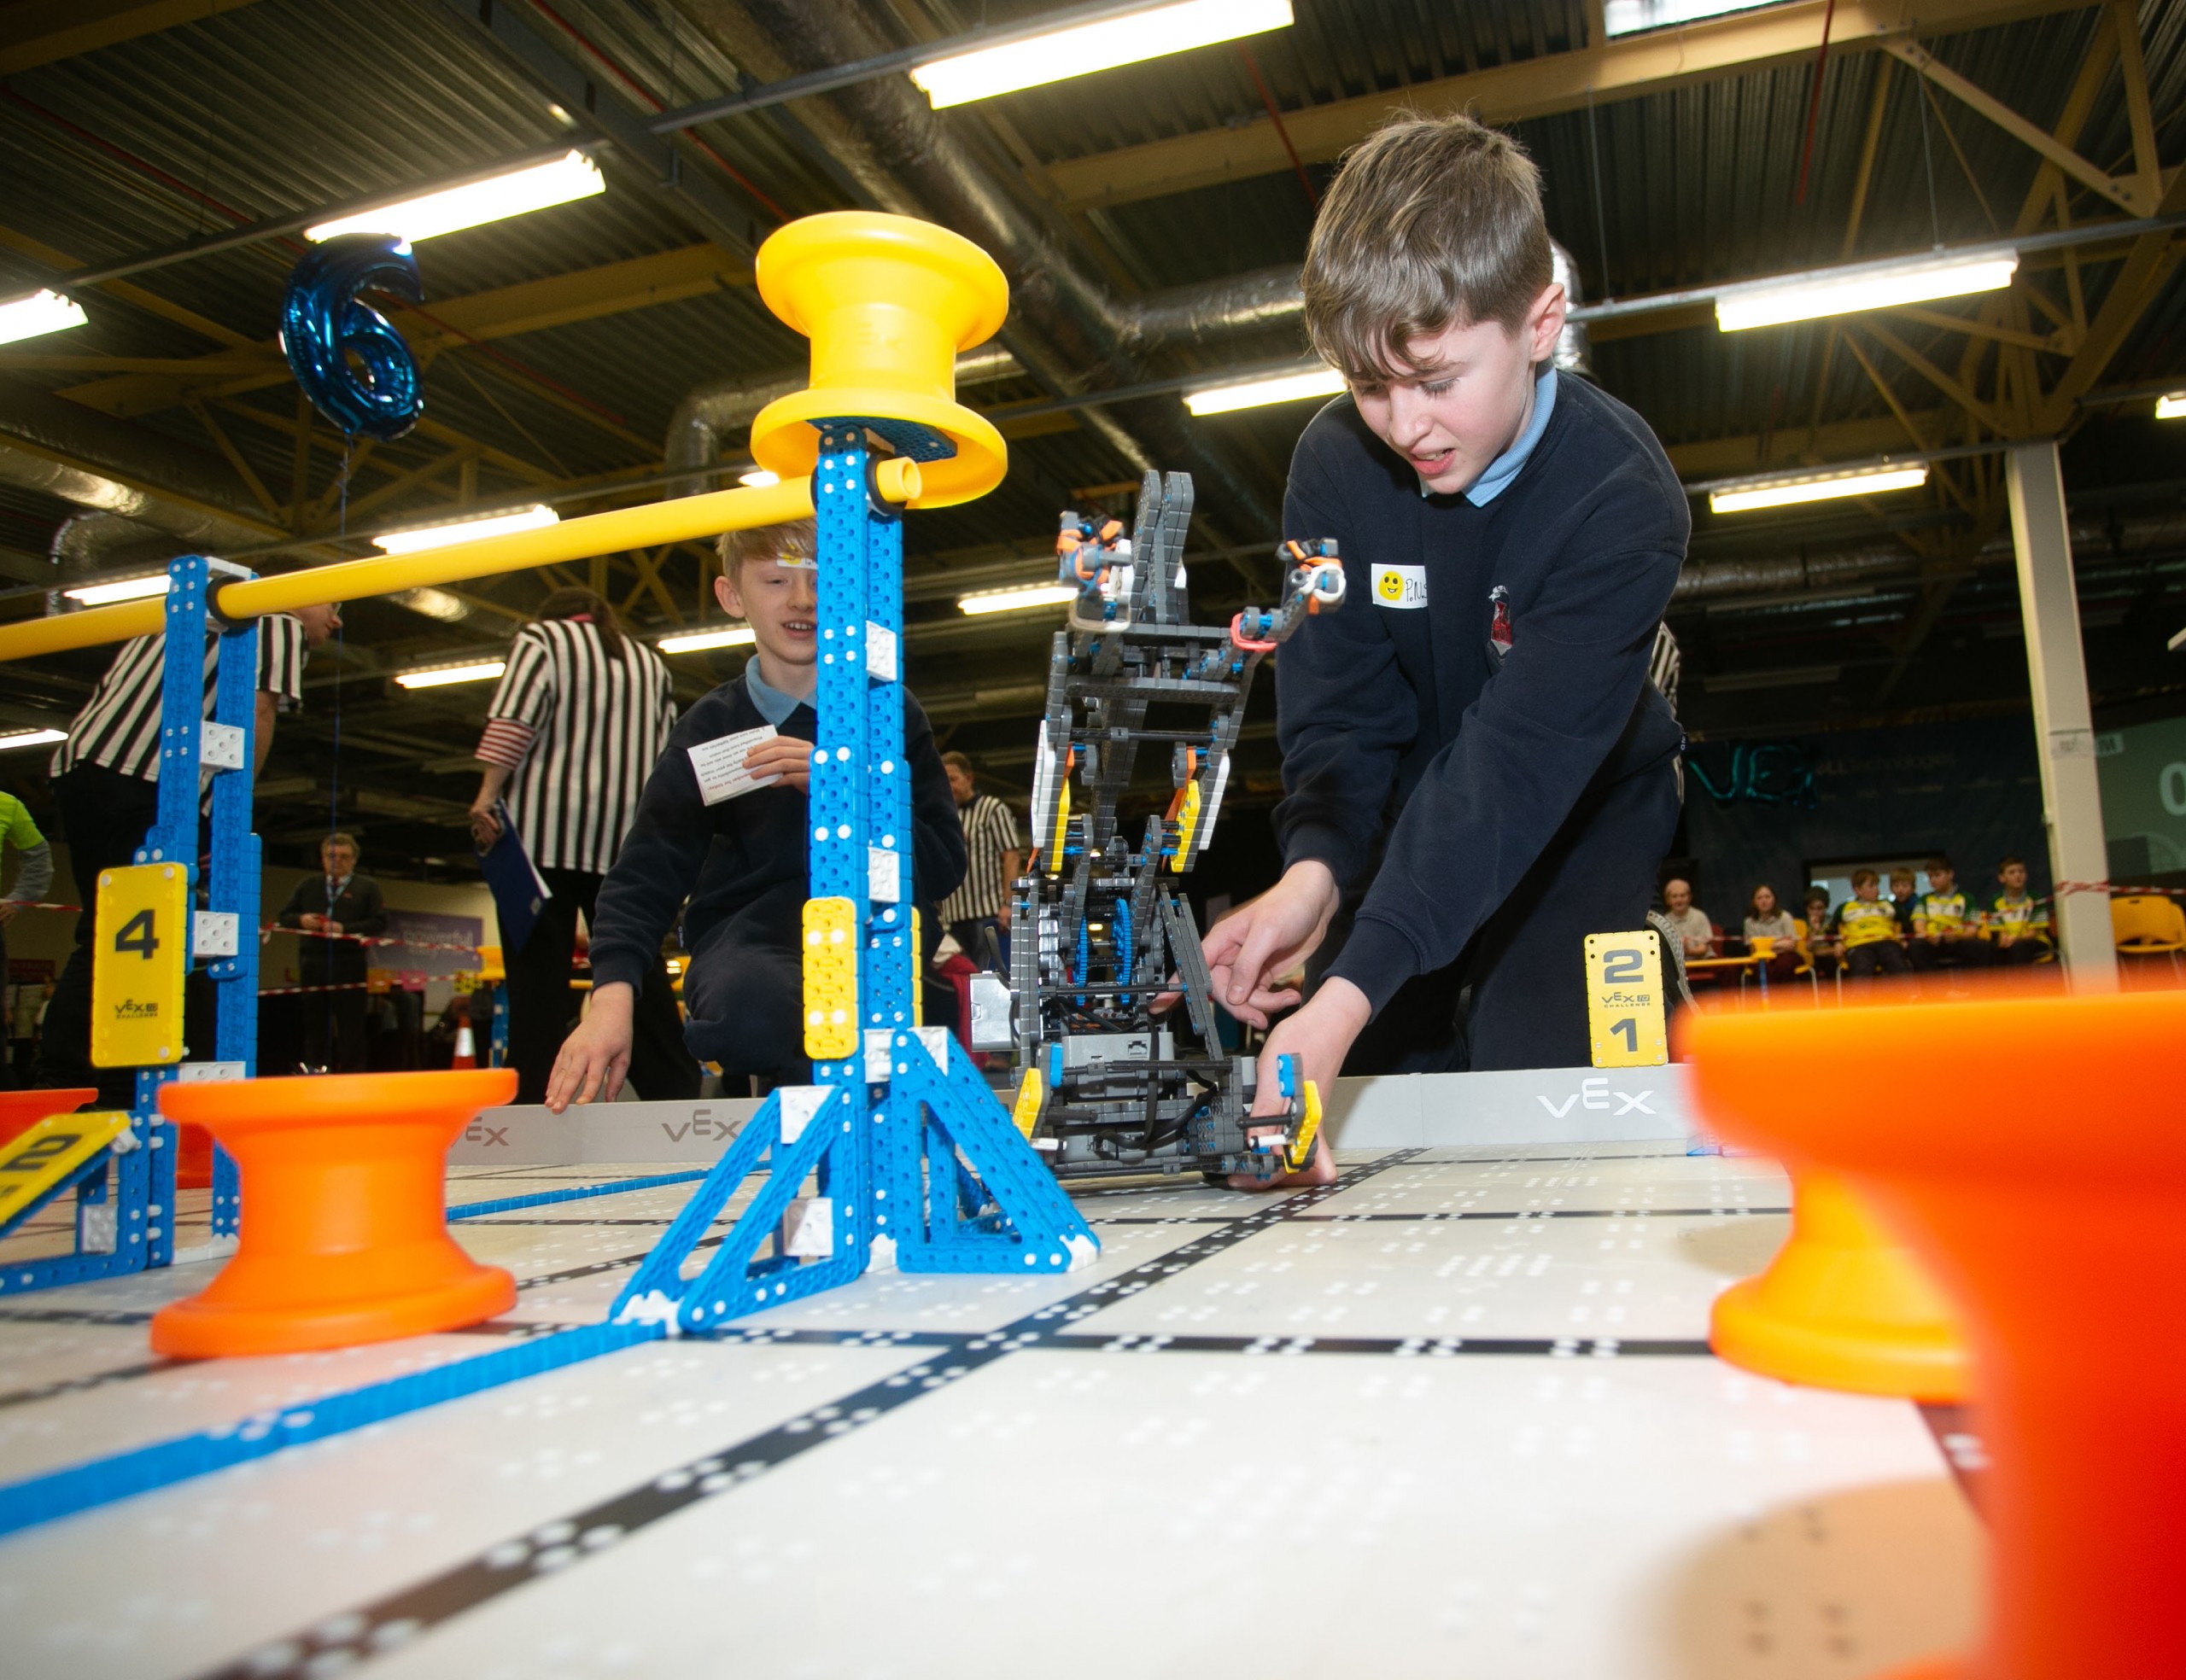 Two students handle their LEGO creation at the Vex Robotics Competition